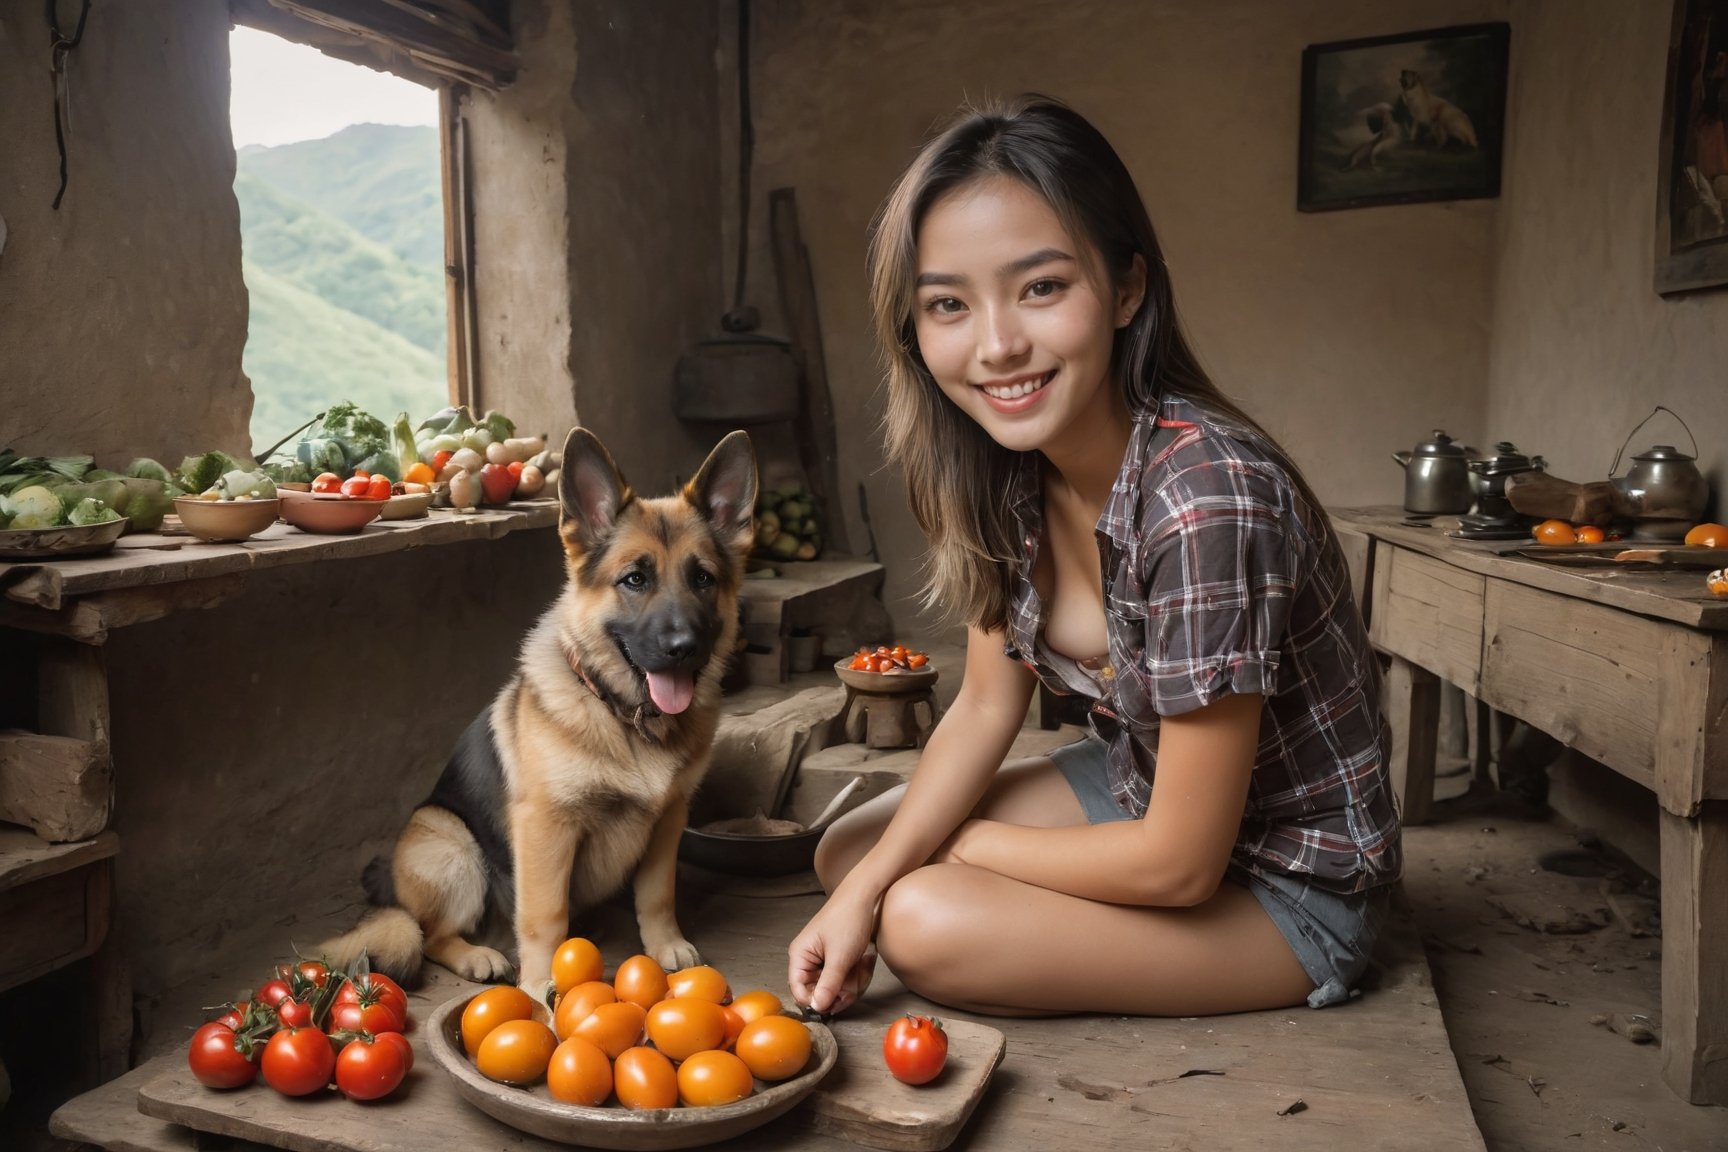 In a very poor rural area in the deep mountains of China, a photo of a super beautiful girl with no makeup and a German Shepherd puppy, smiling, wearing a plaid shirt, (underwear), small breasts, sitting on a wooden stool, cutting vegetables next to a wooden table , there are a small amount of vegetables, a small amount of tomatoes, a small amount of eggs on the table, side, gray shorts, slender thighs, bare feet, oil lamp flickering, dilapidated room, dark room, a pot on the fire on the ground, soup simmering in the pot, steaming , old clothes, calligraphy and paintings, full-body photos hung on the wall, rich in details, smooth and translucent skin, super clear, super realistic, super wide-angle lens, super real, long shot